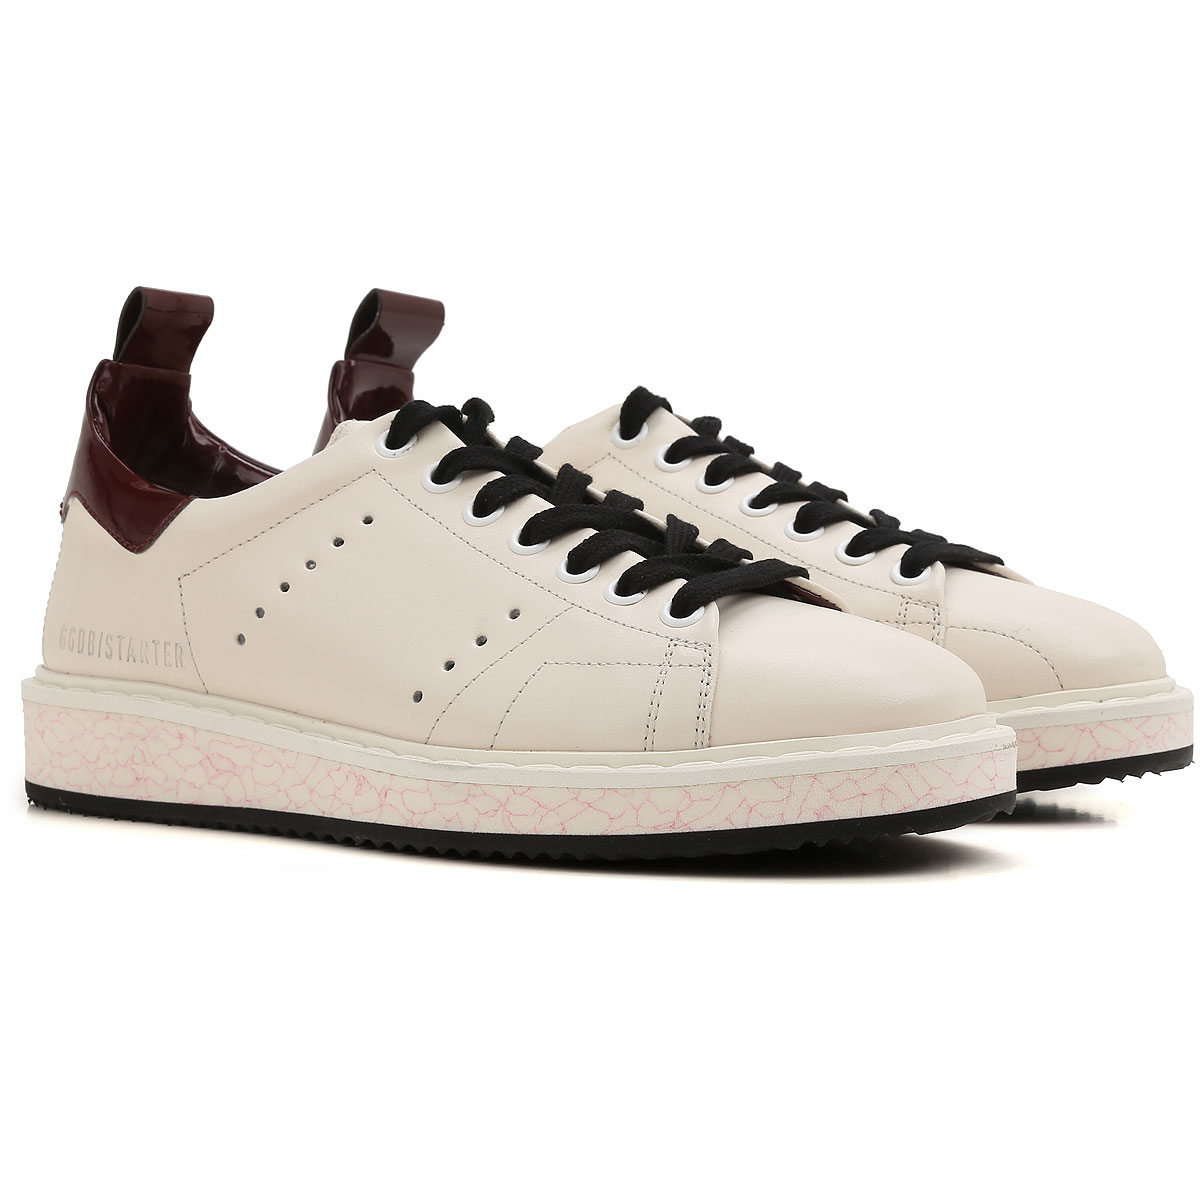 Womens Shoes Golden Goose, Style code: g31ws631-g1-